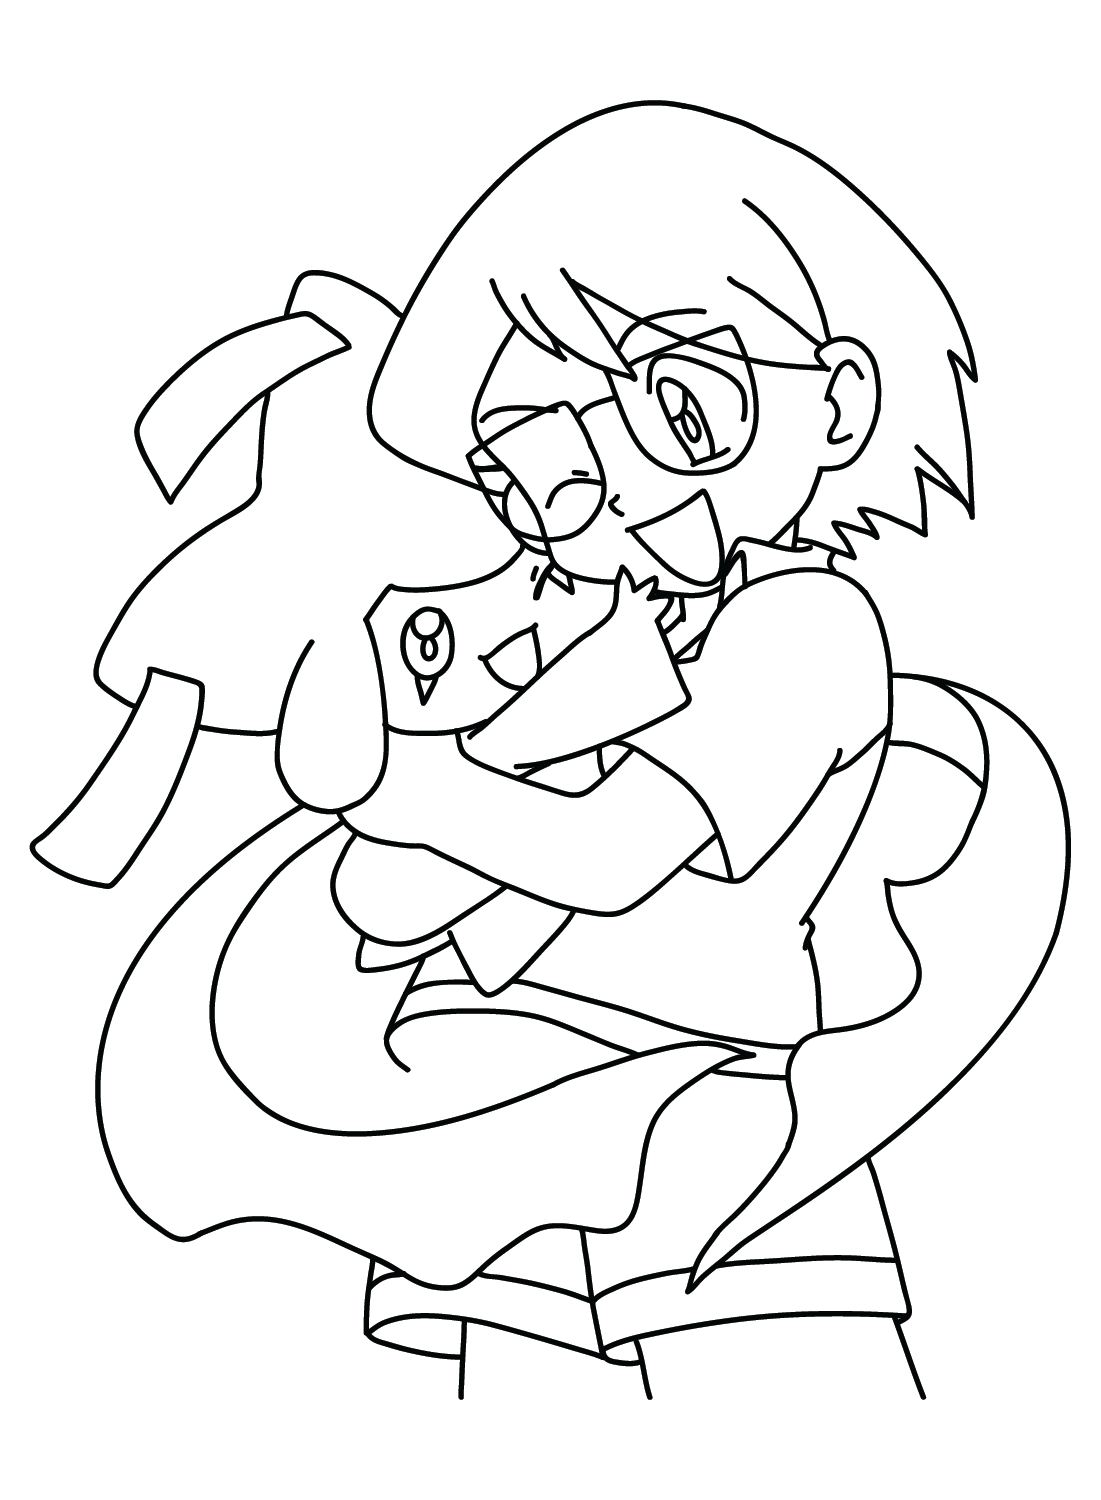 Max Pokemon Coloring Sheet for Kids from Max Pokemon